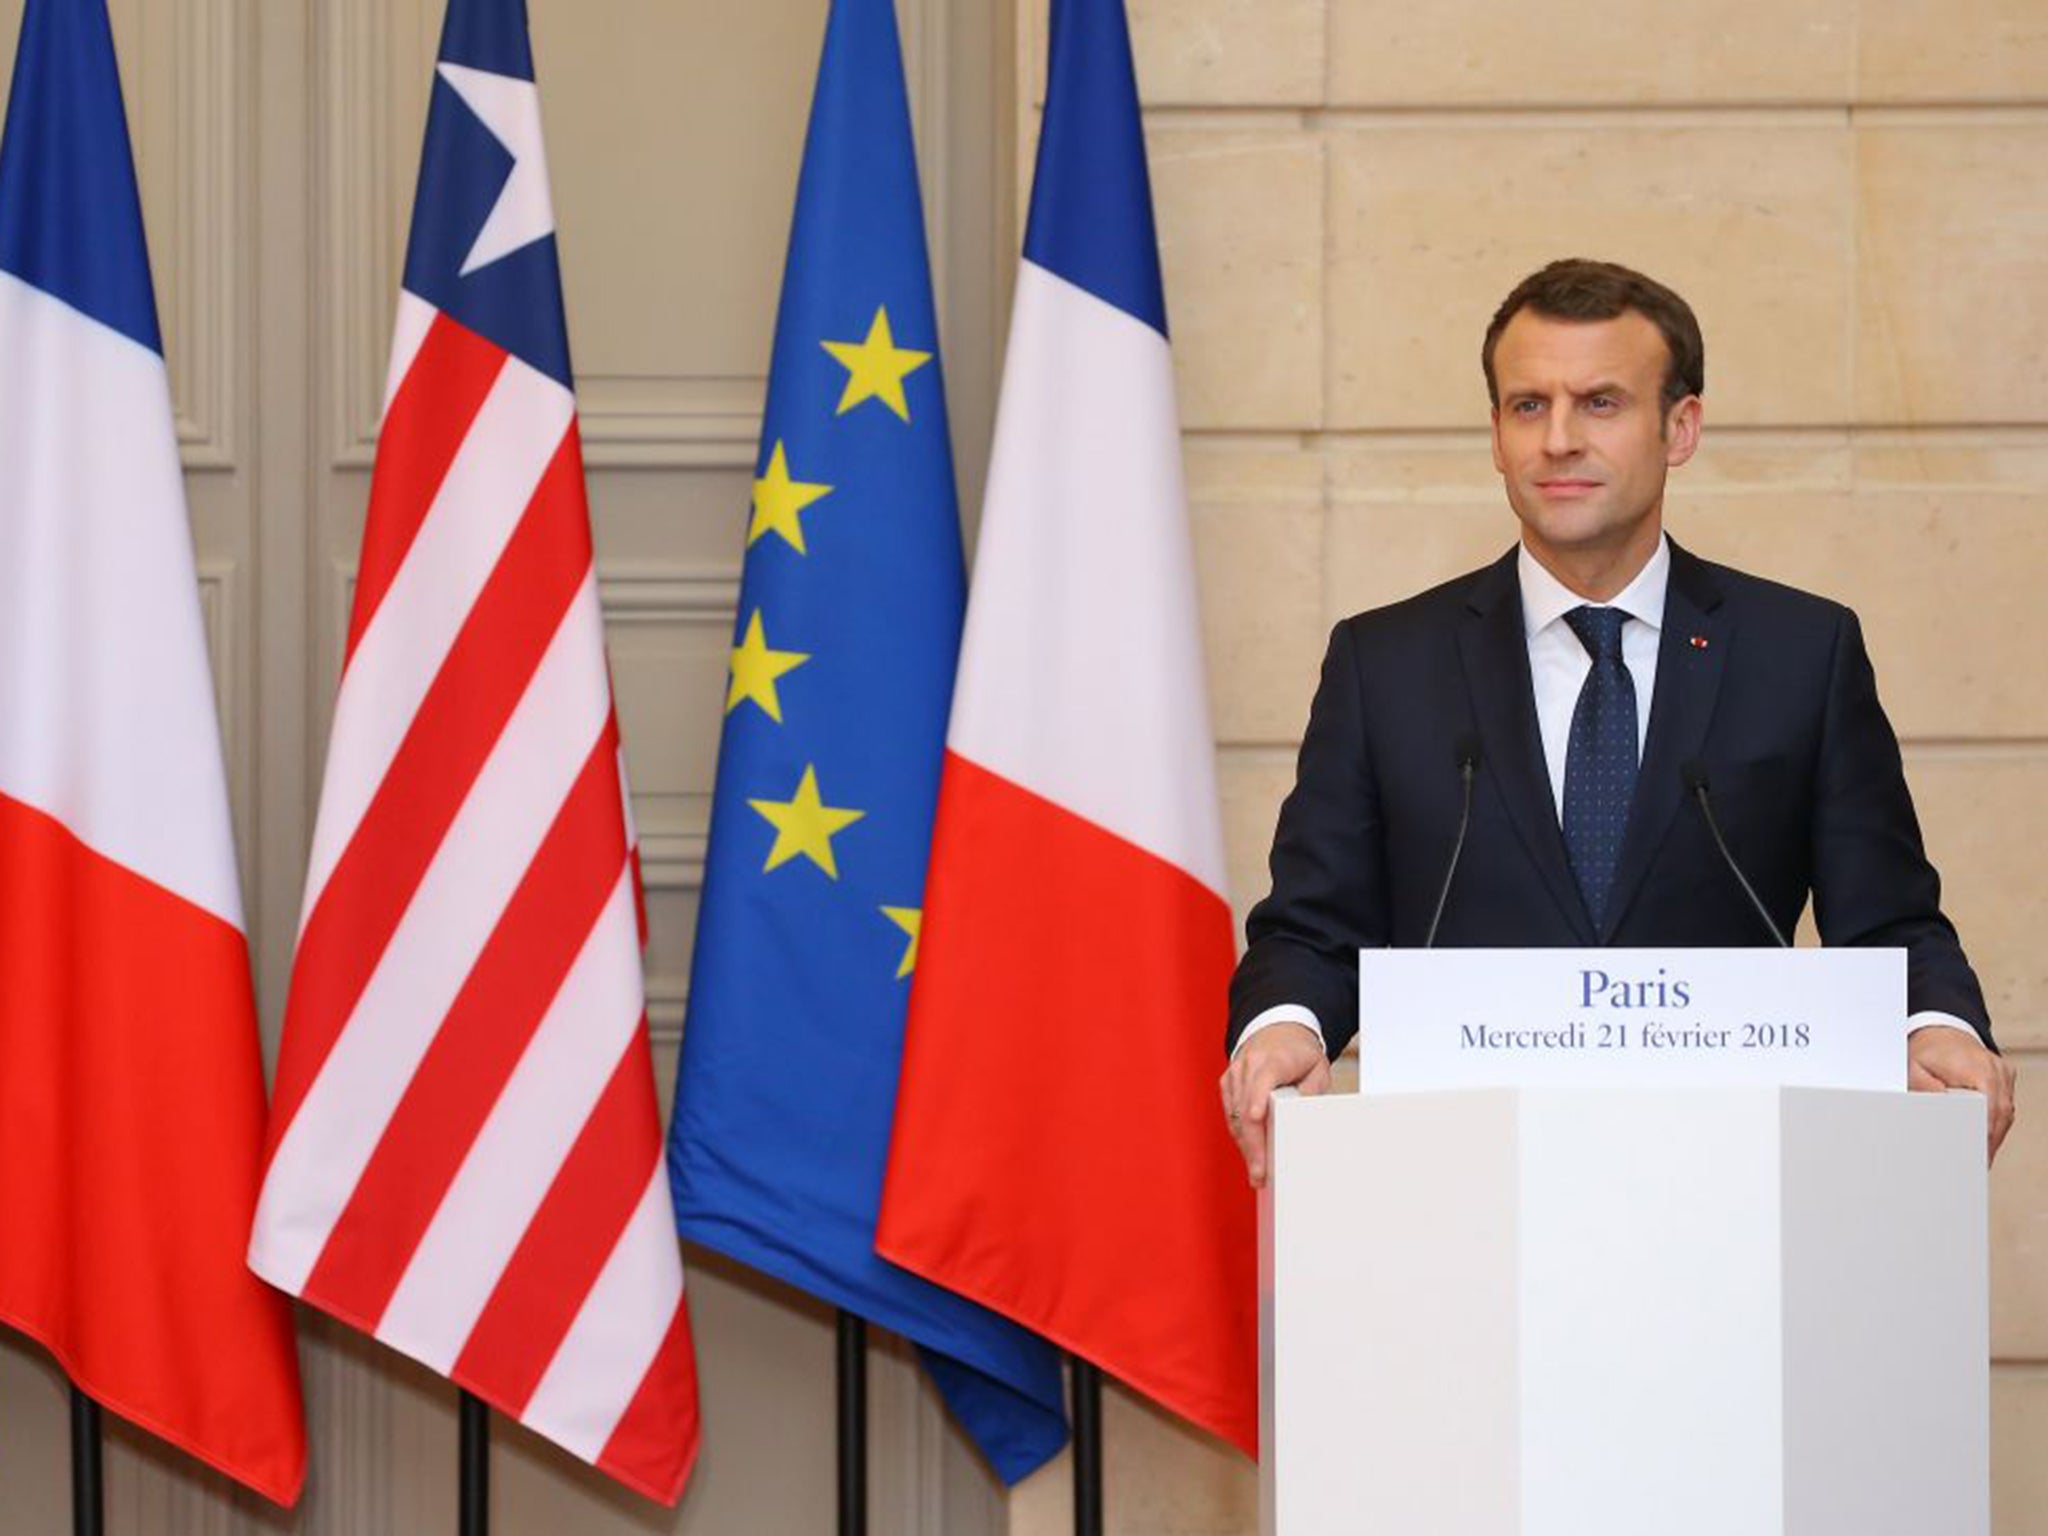 The French President during a press conference at the Elysee Palace on Wednesday